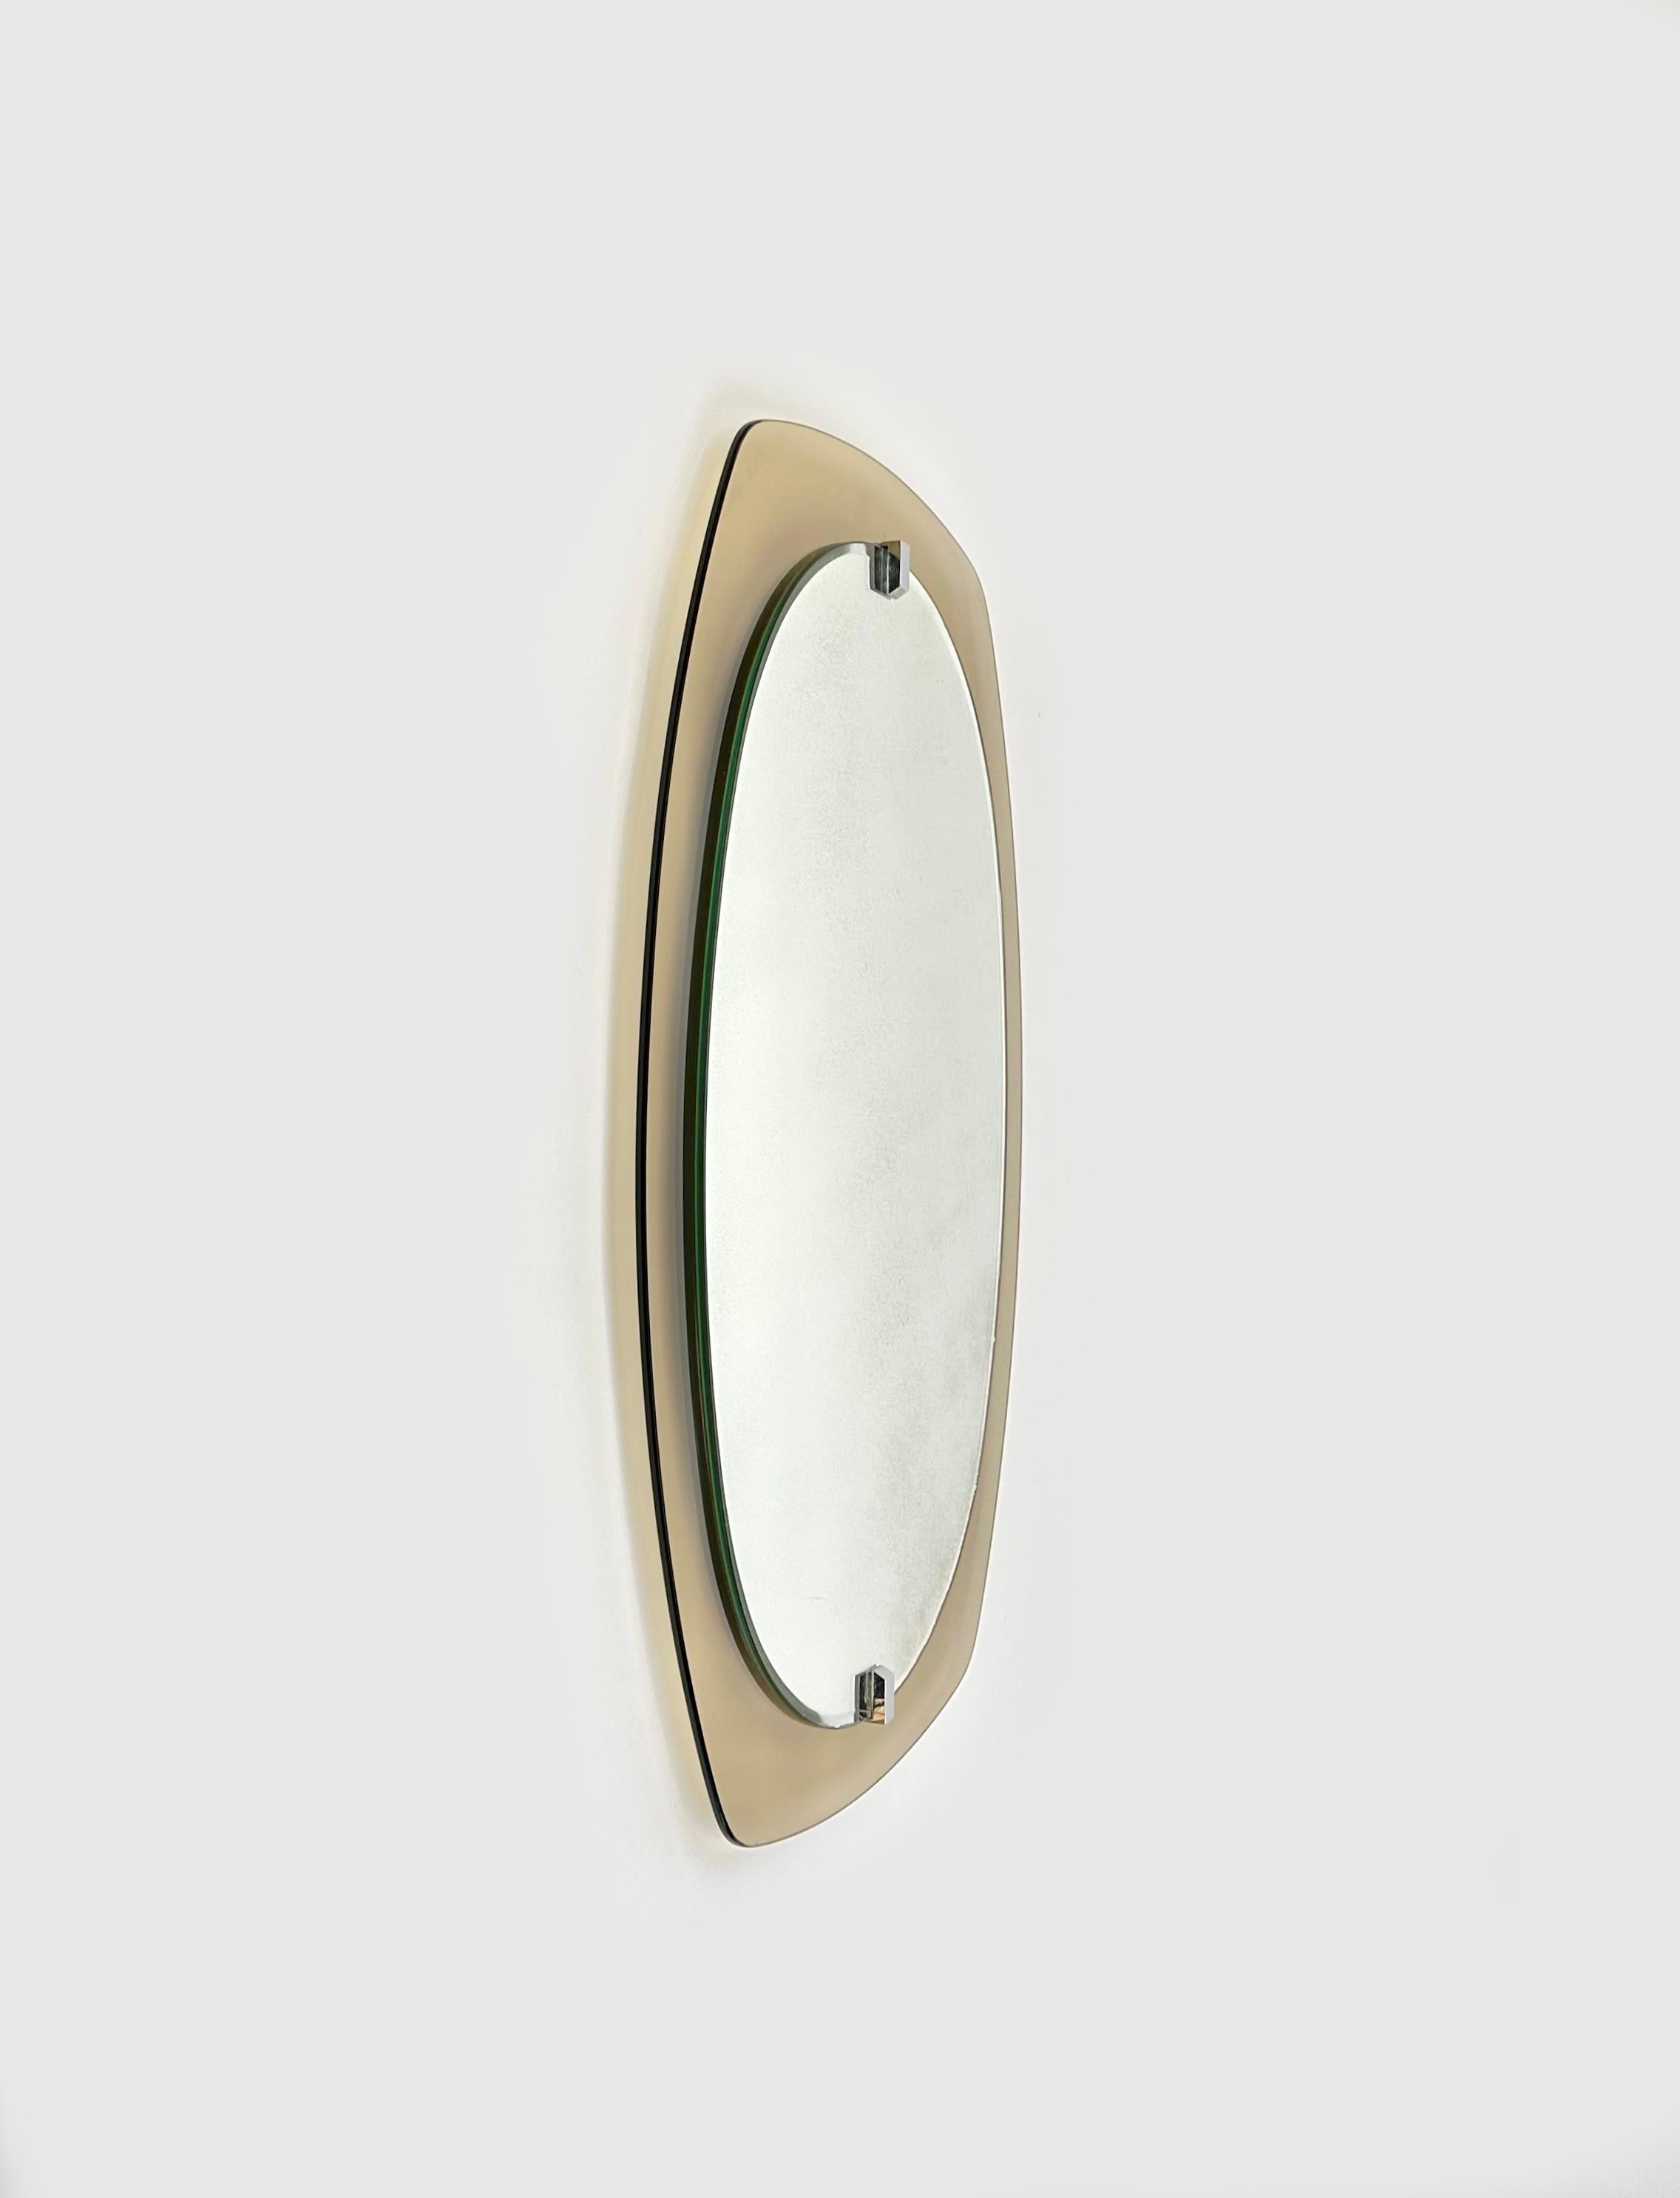 Midcentury Wall Mirror Beveled Smoked Glass Frame by Veca, Italy 1970s For Sale 2